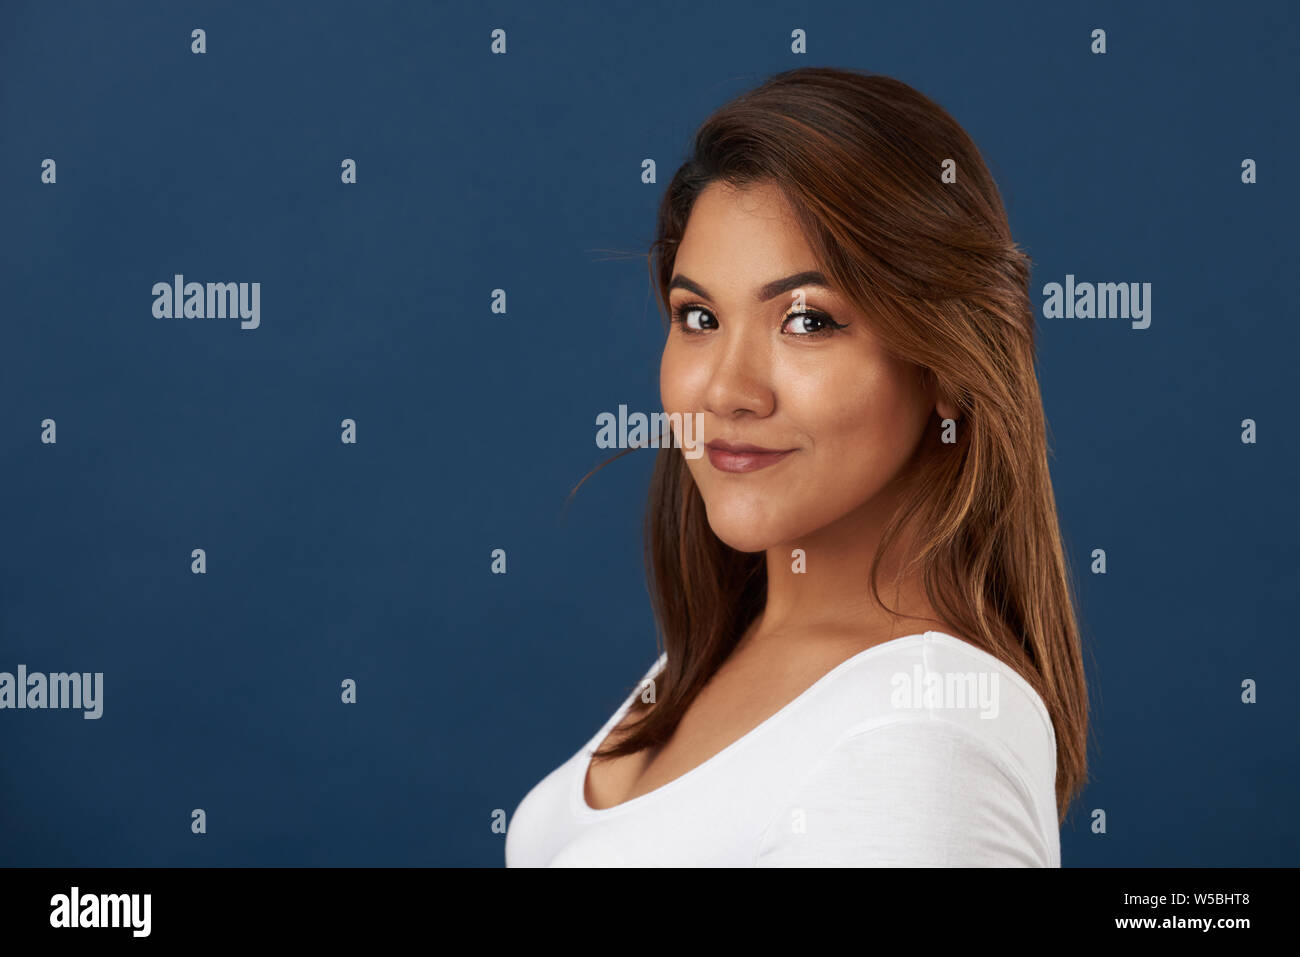 Pretty young latina girl portrait with copy space on blue background Stock Photo